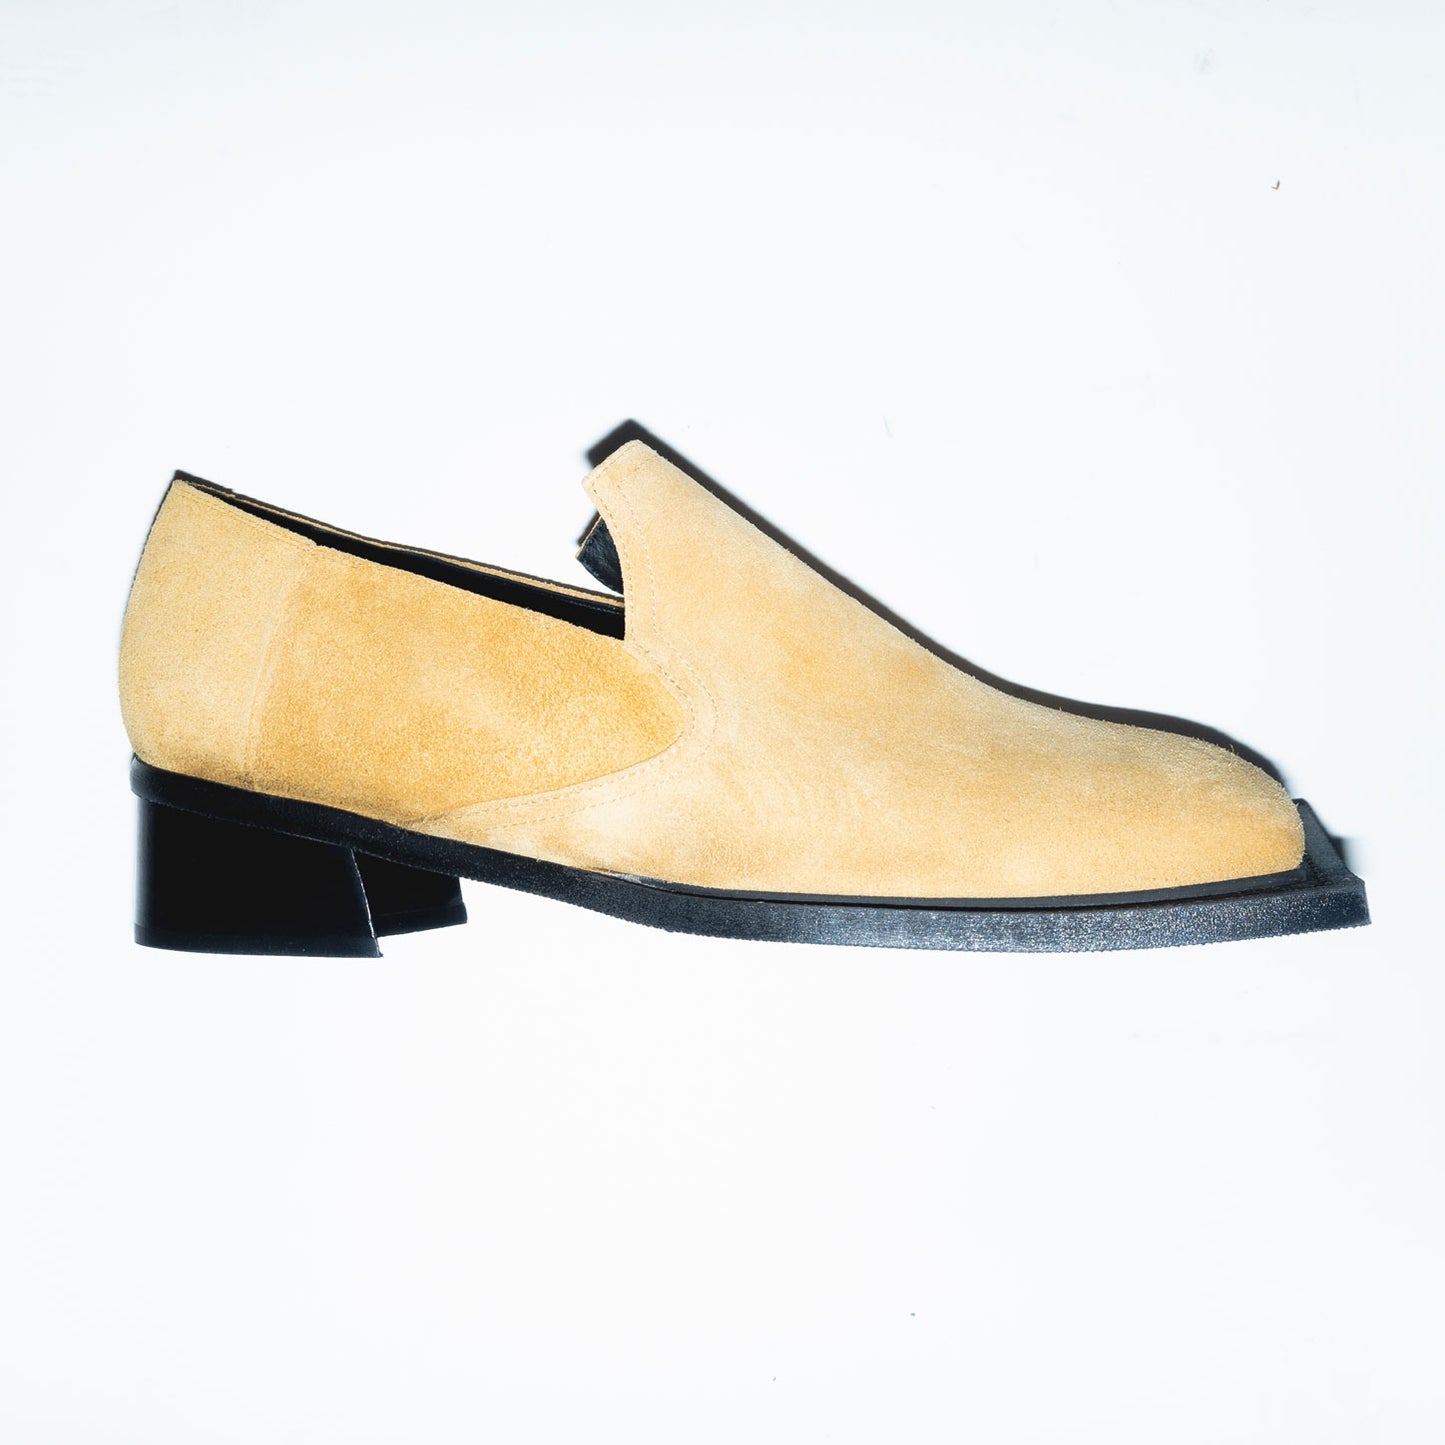 Archive Howled Loafers in Camel Suede Leather